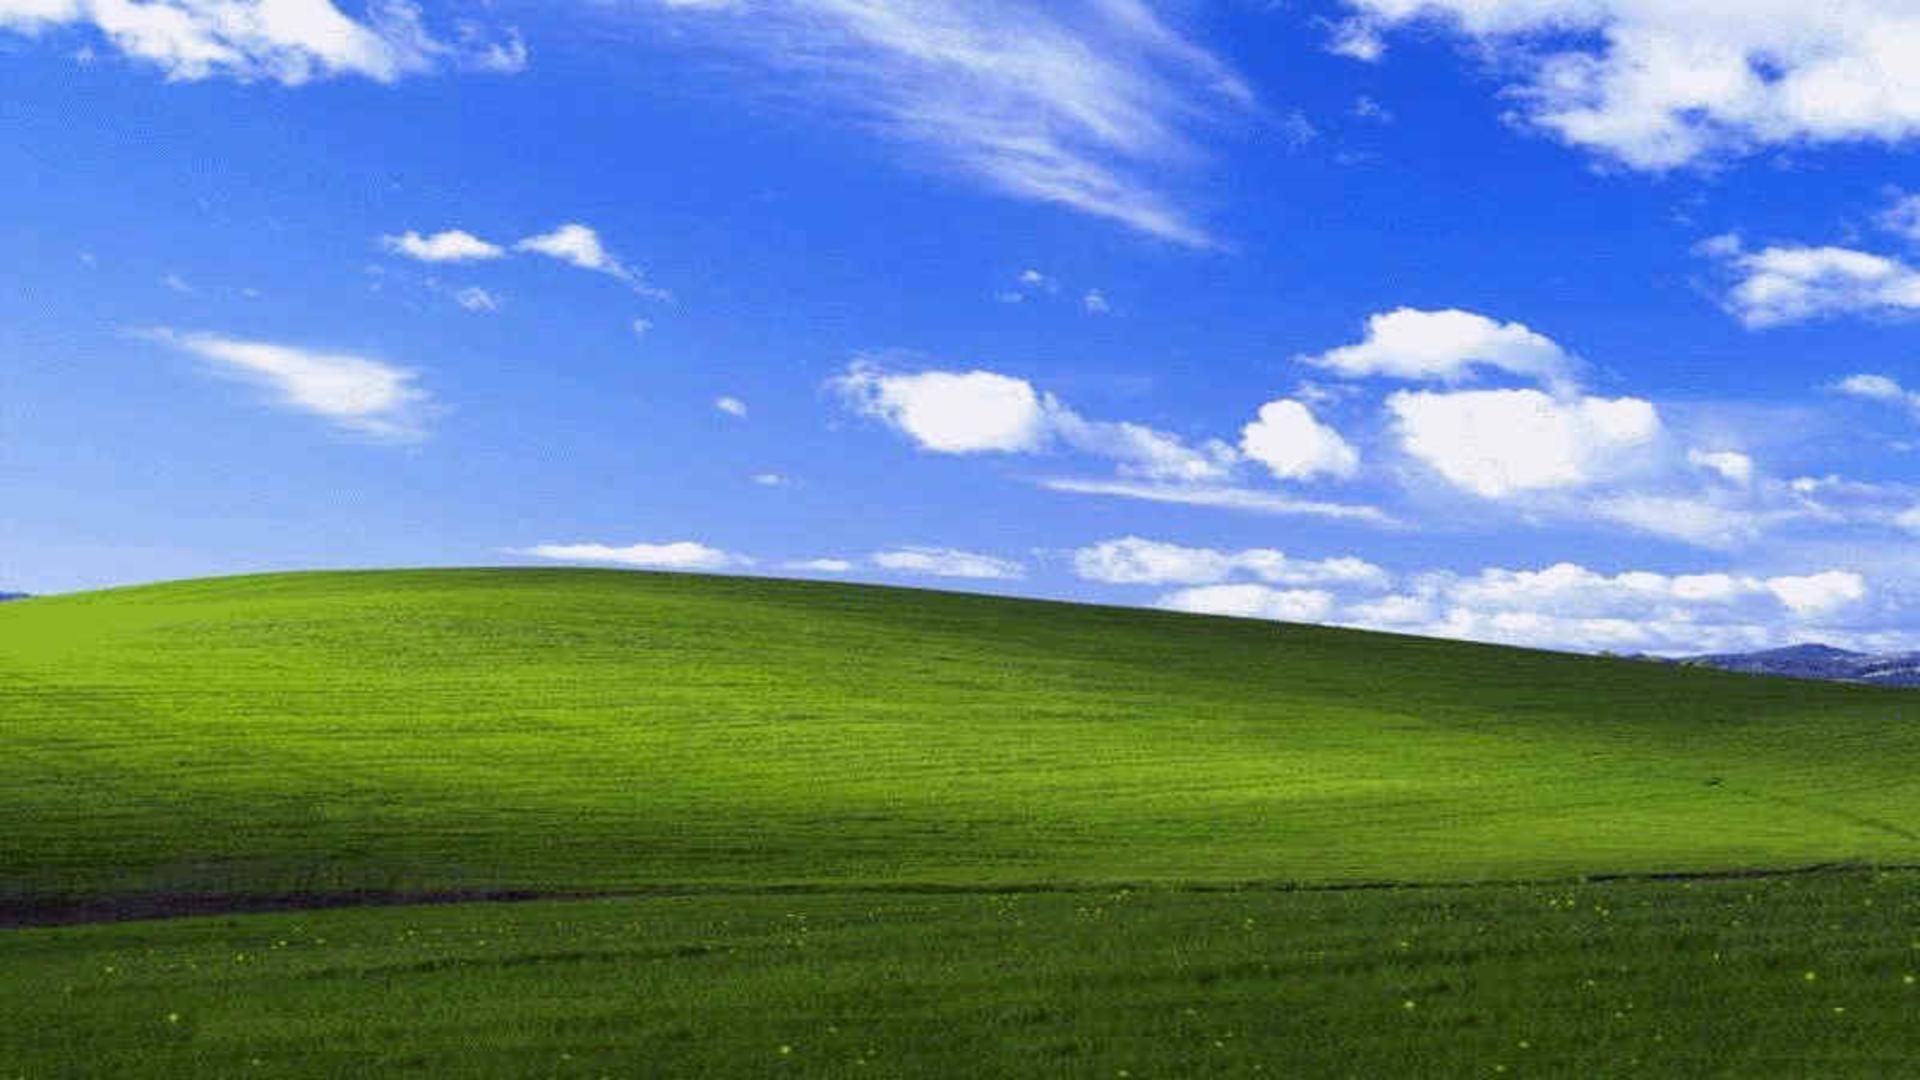 Cool windows xp wallpaper viewing gallery, Themes